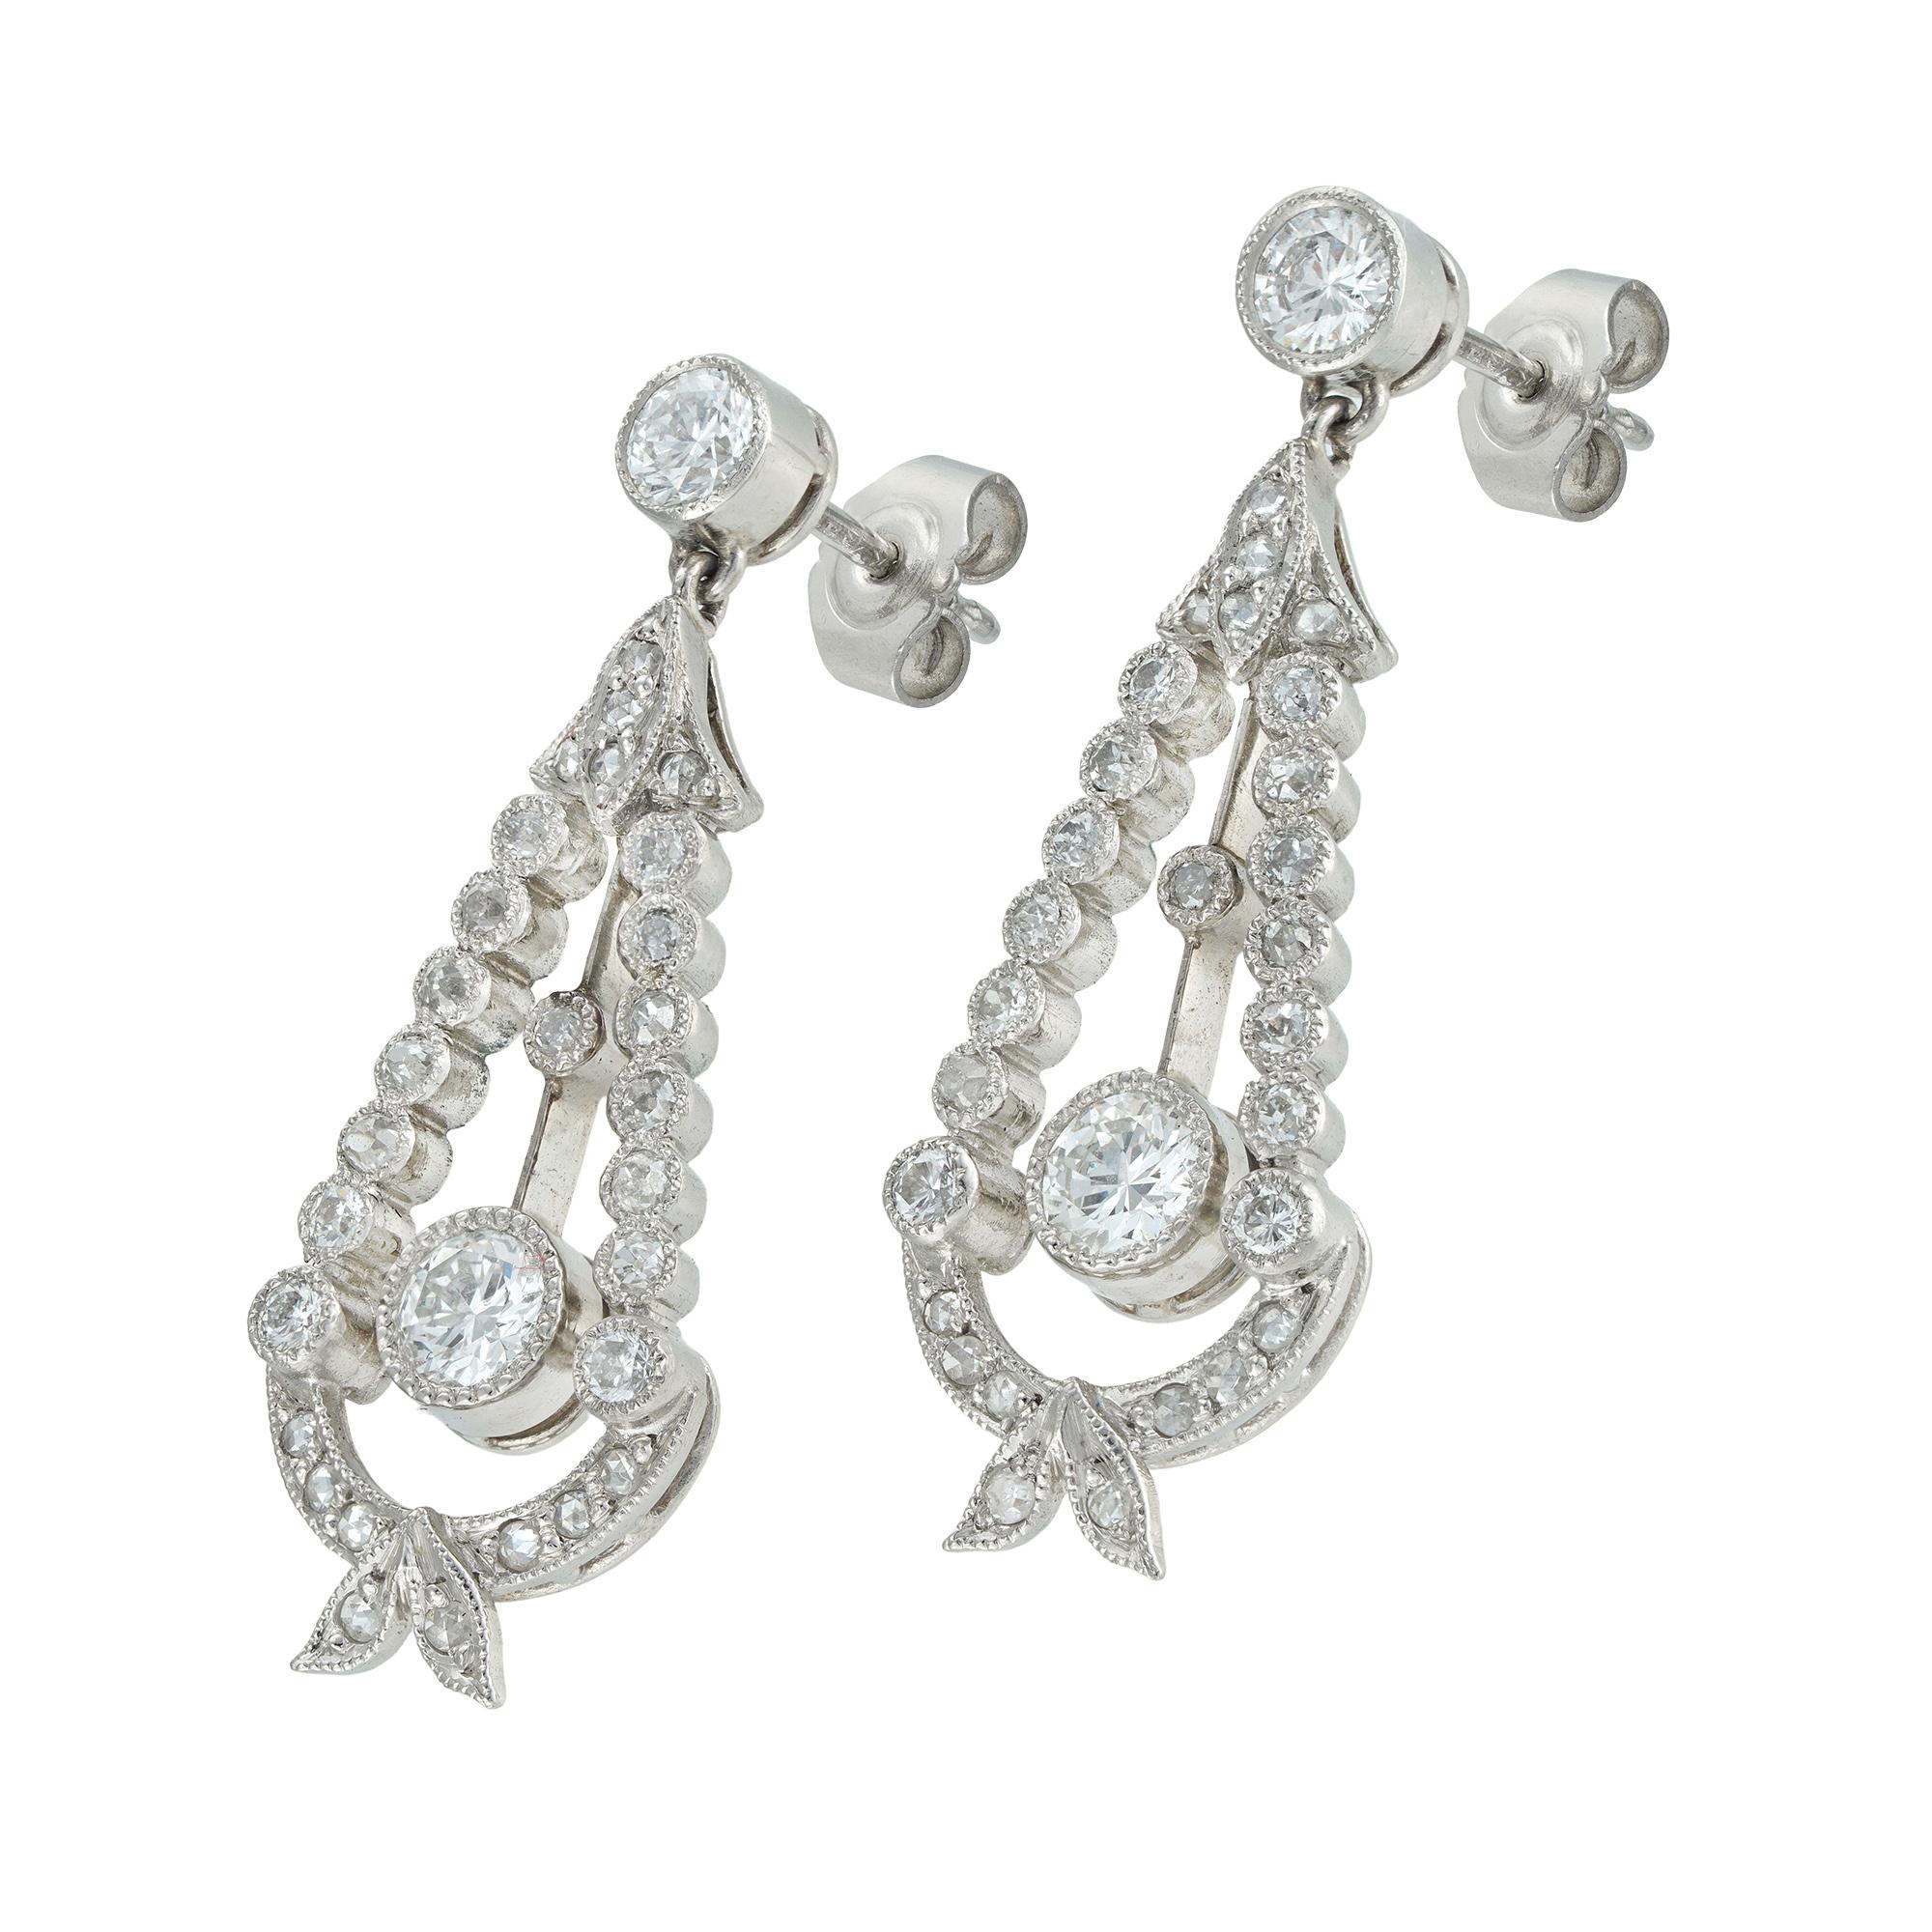 A pair of diamond-set drop earrings, each earring comprising an old brilliant-cut diamond suspended in a frame of old and rose-cut diamonds to form a wreath pattern, surmounted by a single old brilliant-cut diamond, all diamonds weighing